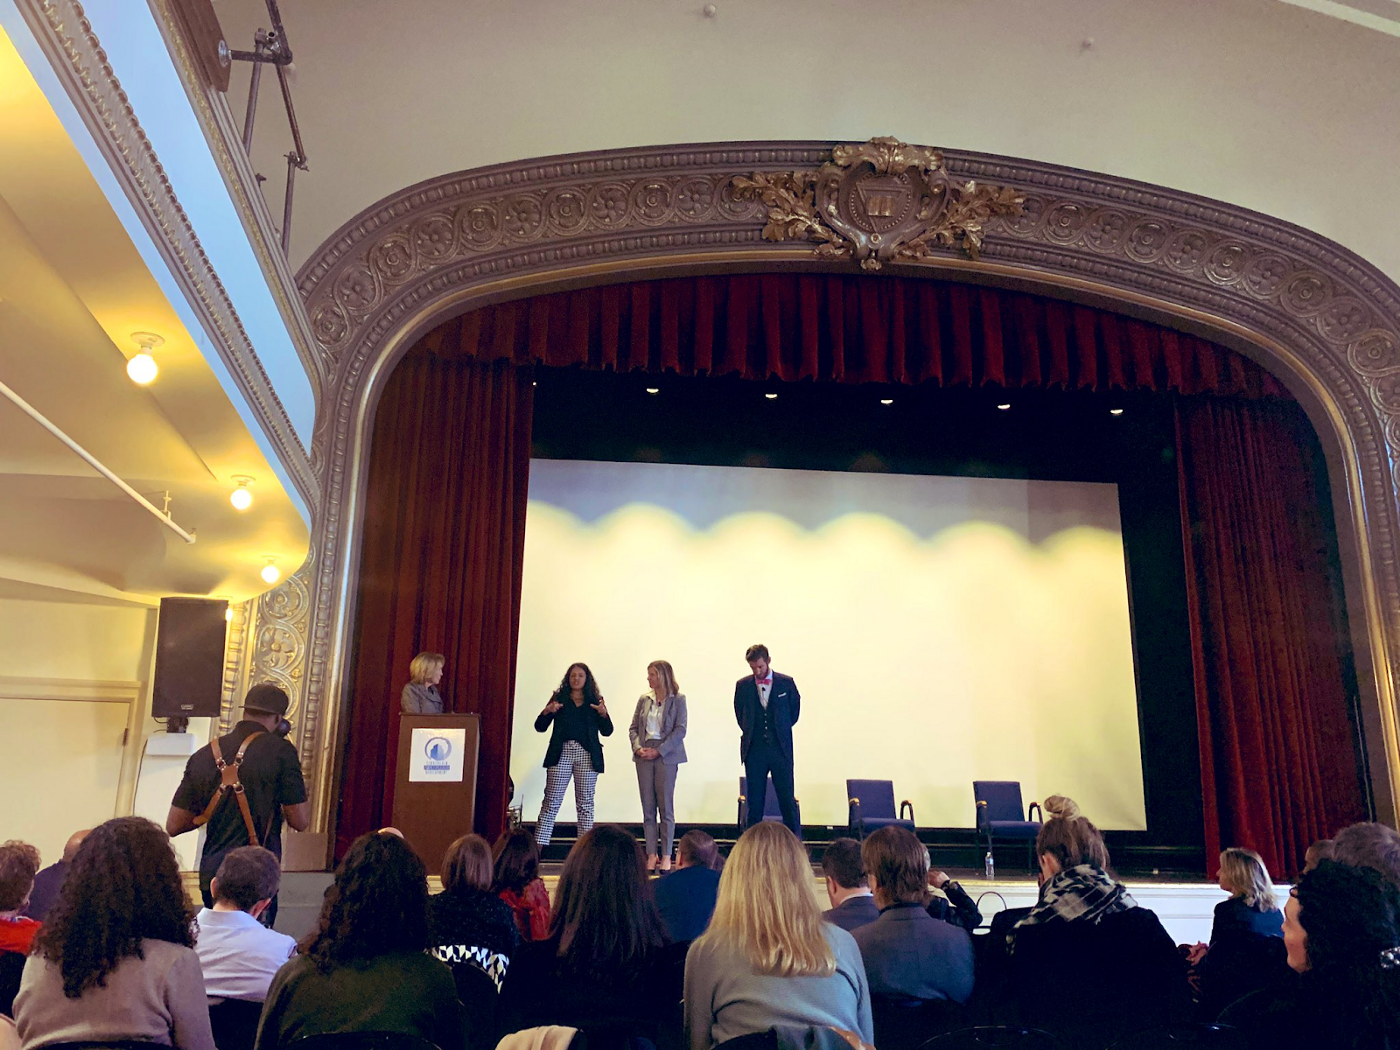 Babyscripts’ founder, Juan Pablo Segura (right) joins other women’s health leaders, Leah Sparks (CEO, Wildflower Health) and Ivelyse Andino (CEO, Radical Health) on a panel at the Healthtech4Medicaid breakout showcase.